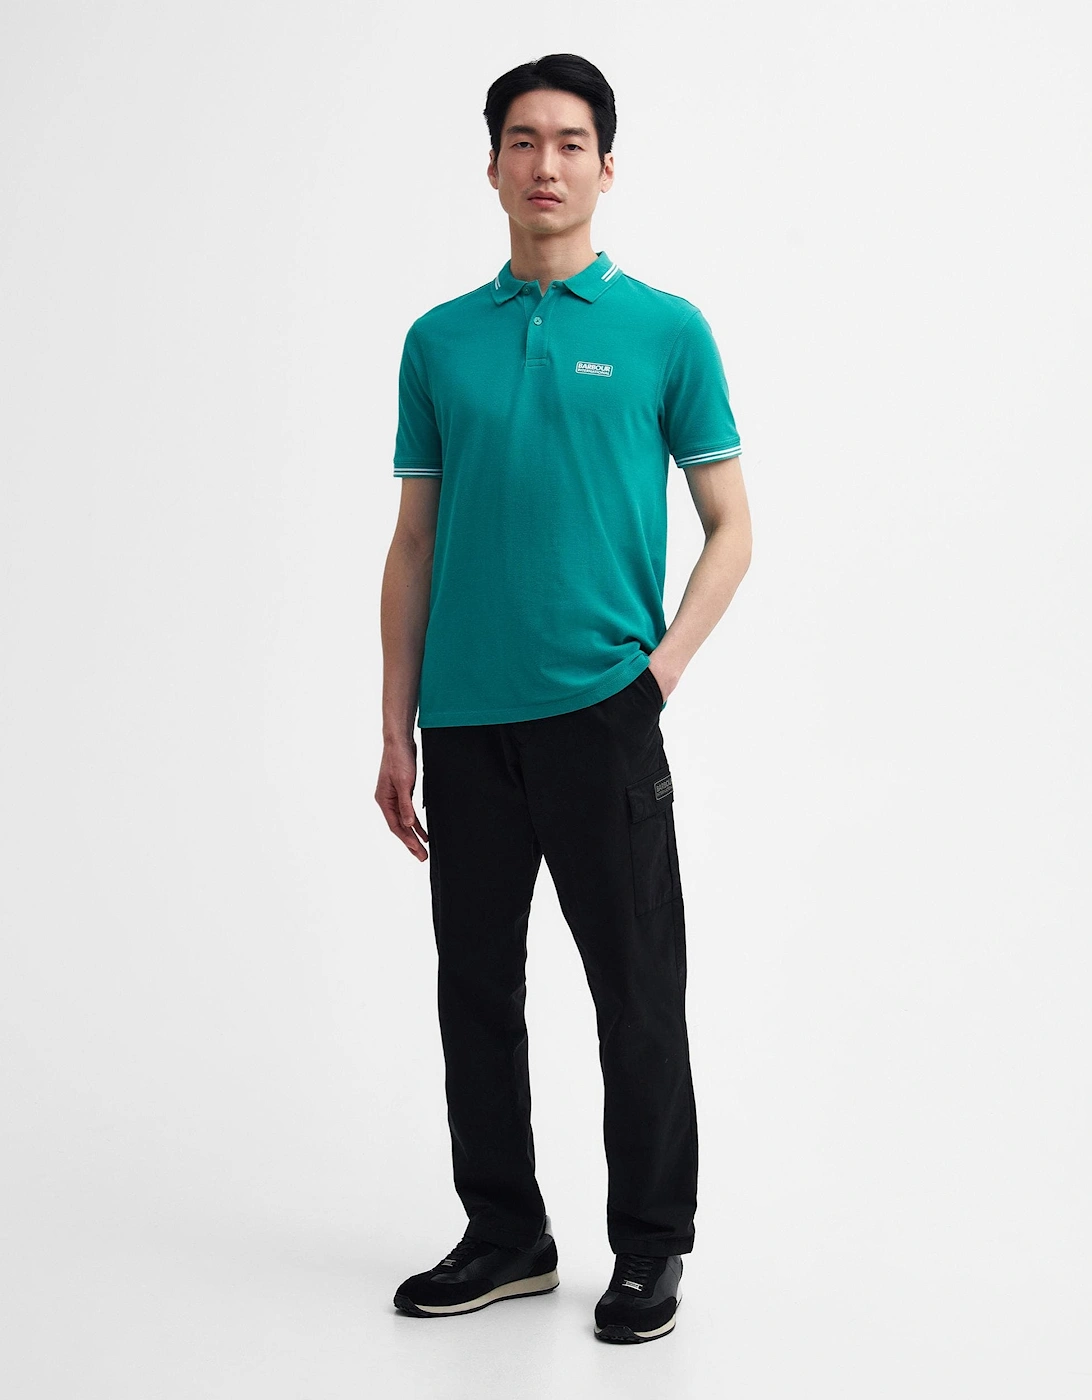 Essential Tipped Mens Tailored Polo